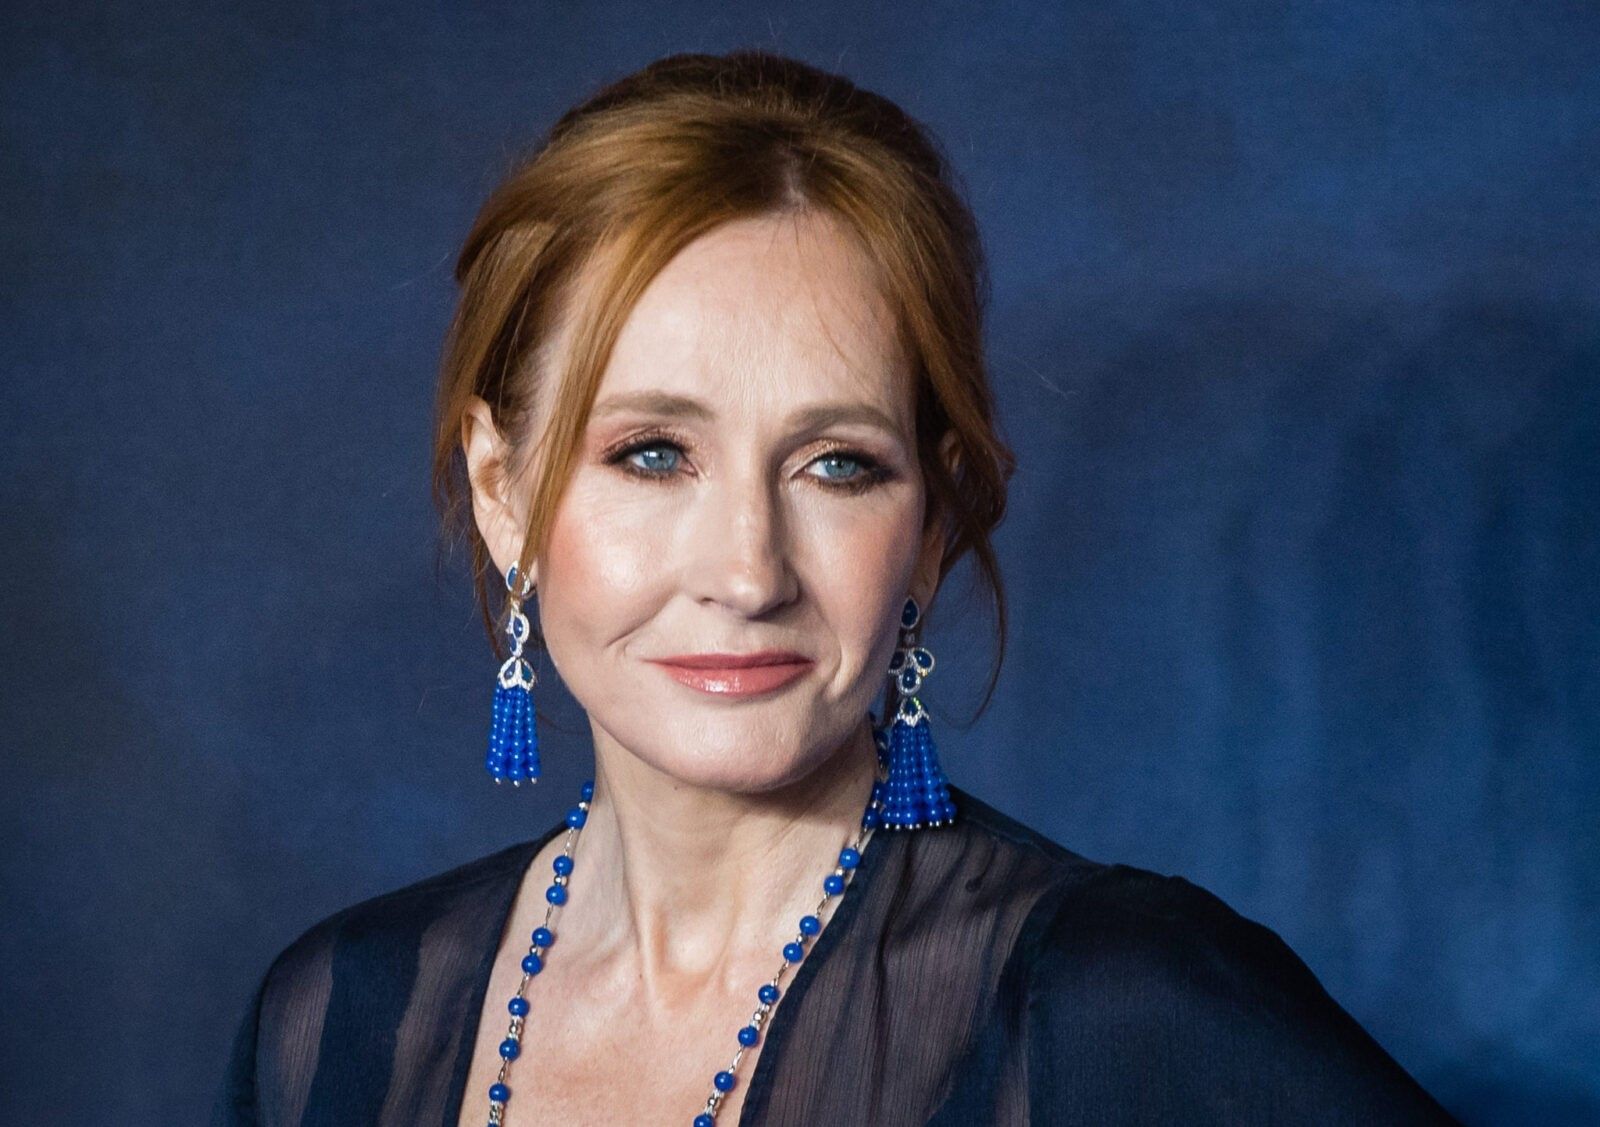 J.K. Rowling Quote: “I make mistakes like the next man. In fact